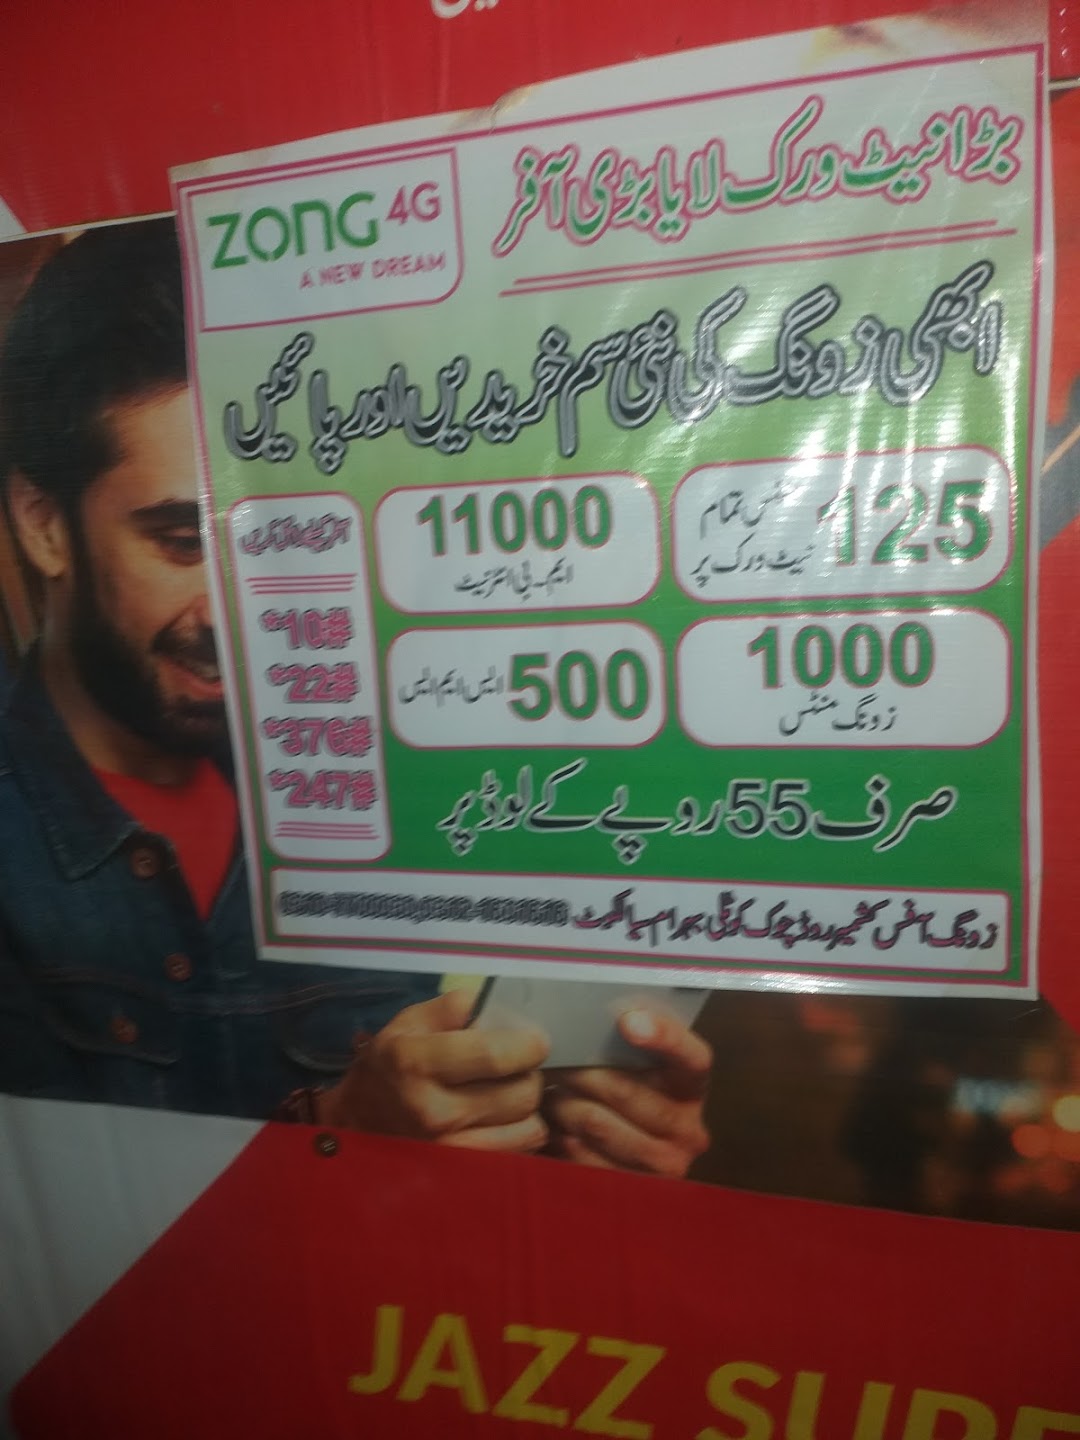 Zong office